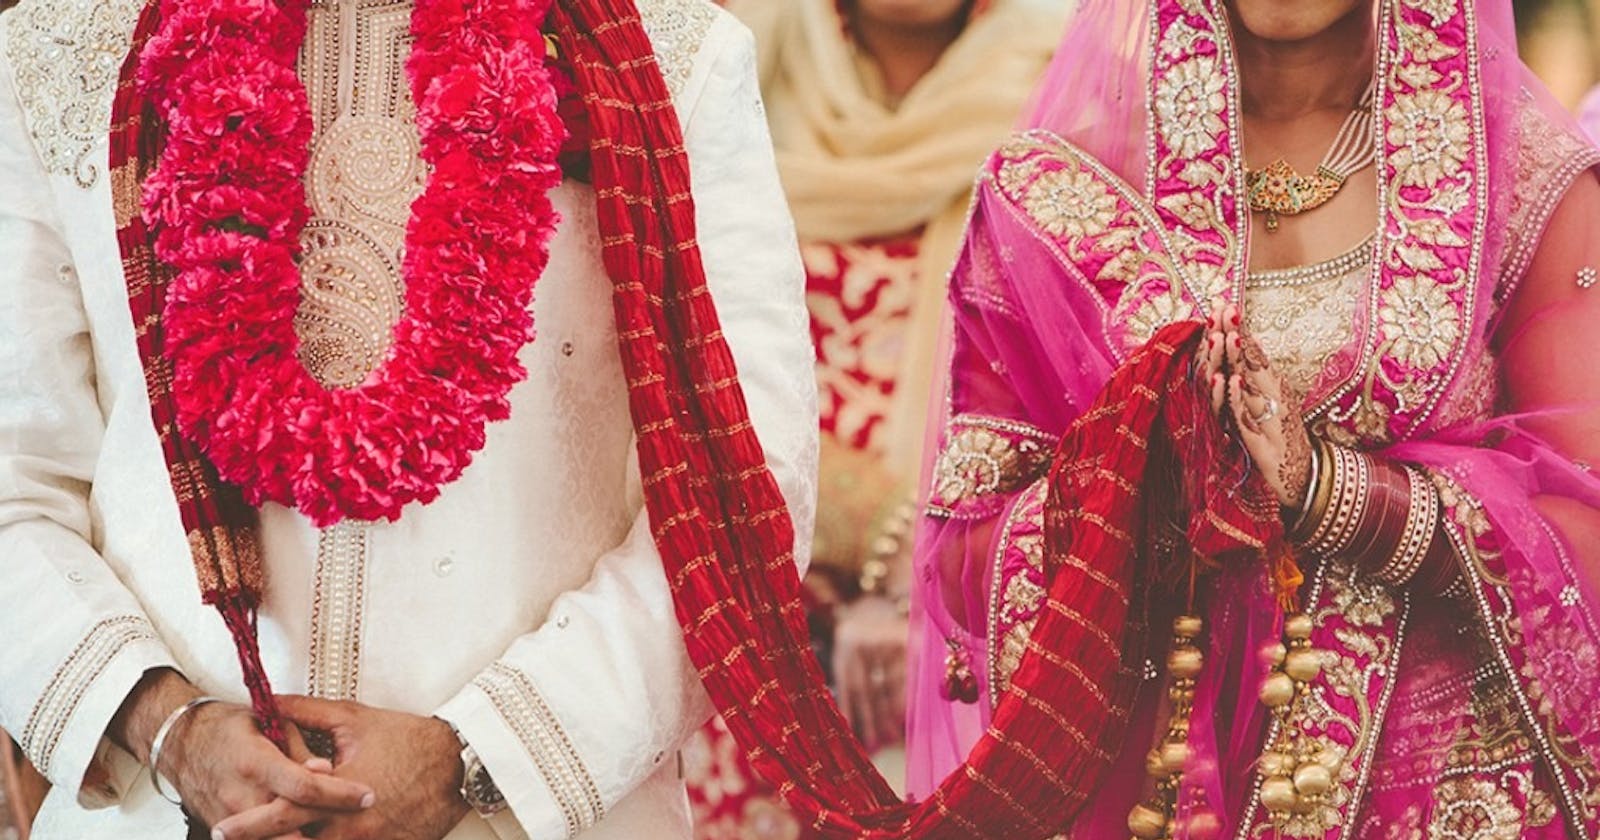 The most Common Age of Marriage in the Punjabi community